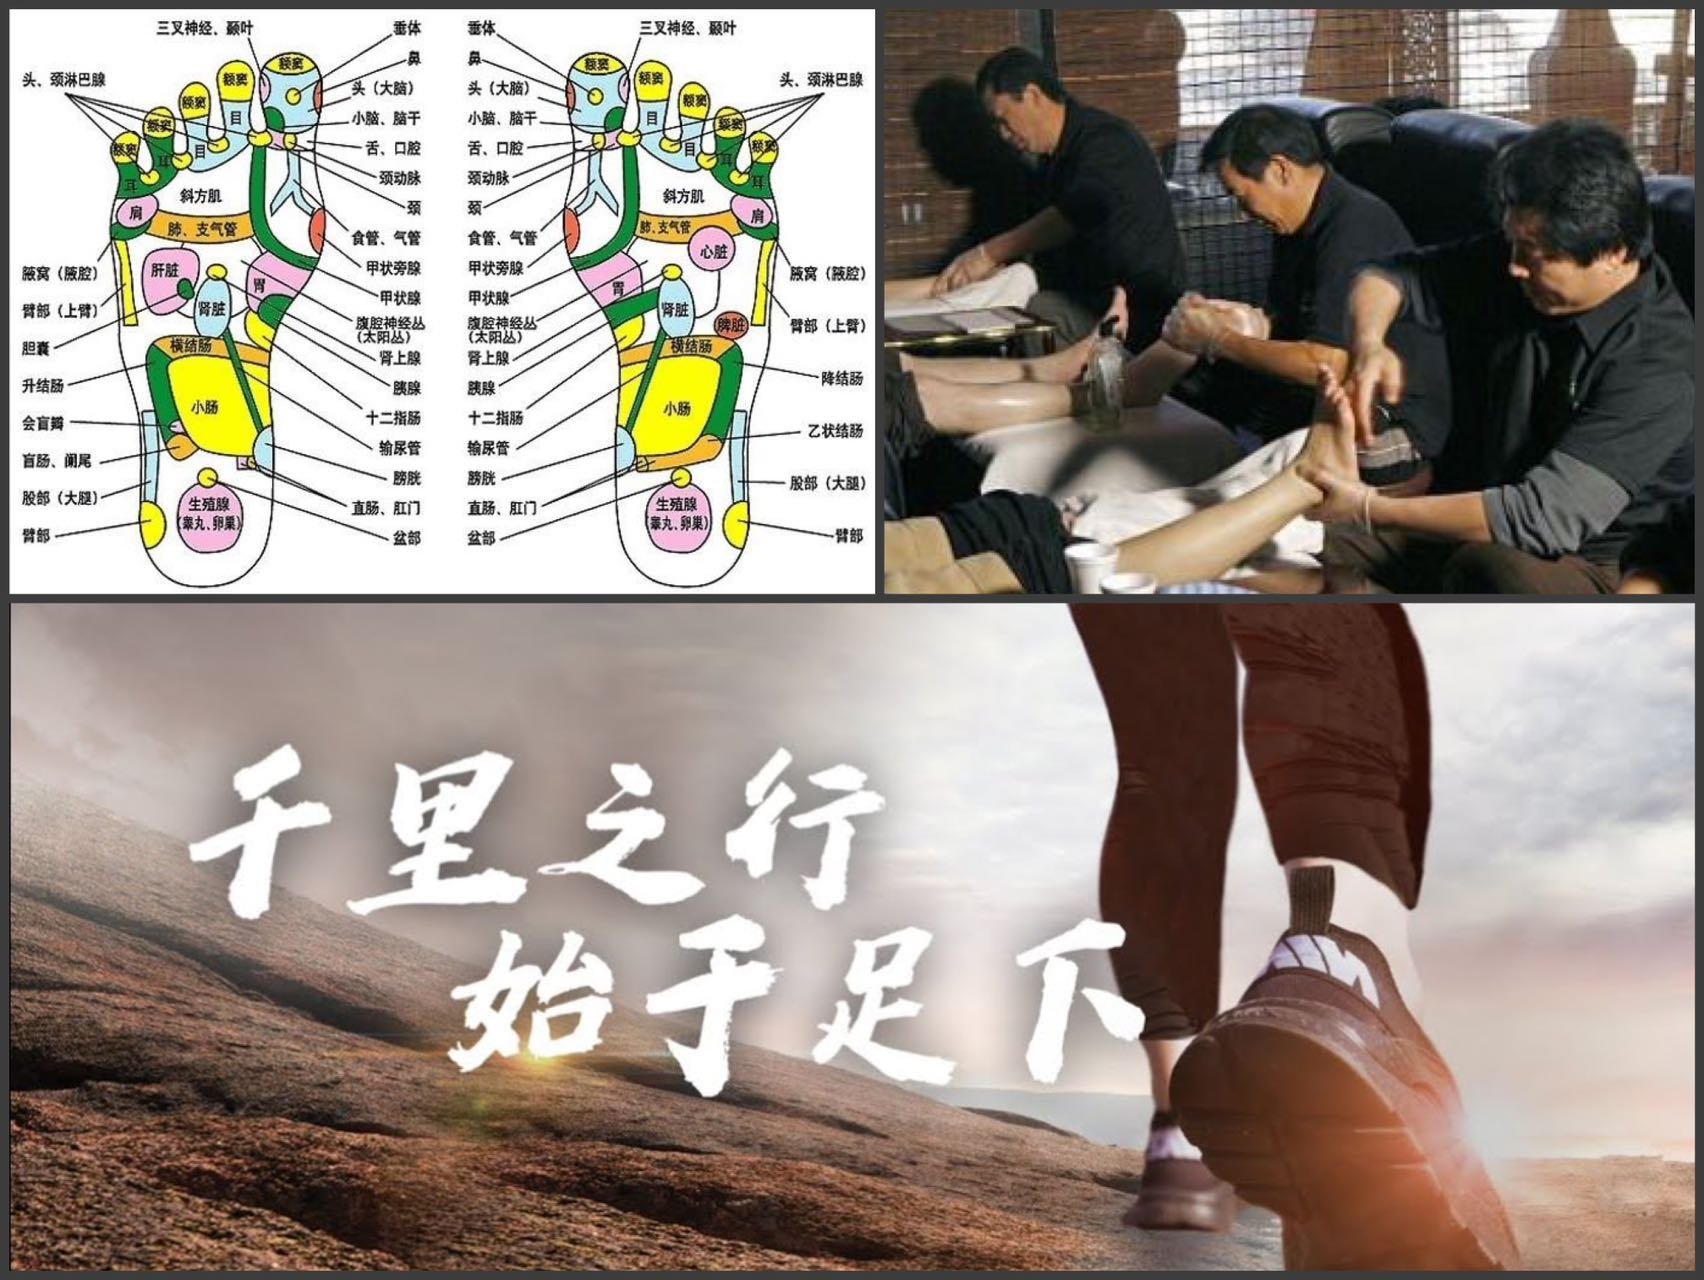 The thing that surprises Dajiang about life in China: The obsession with foot massage.